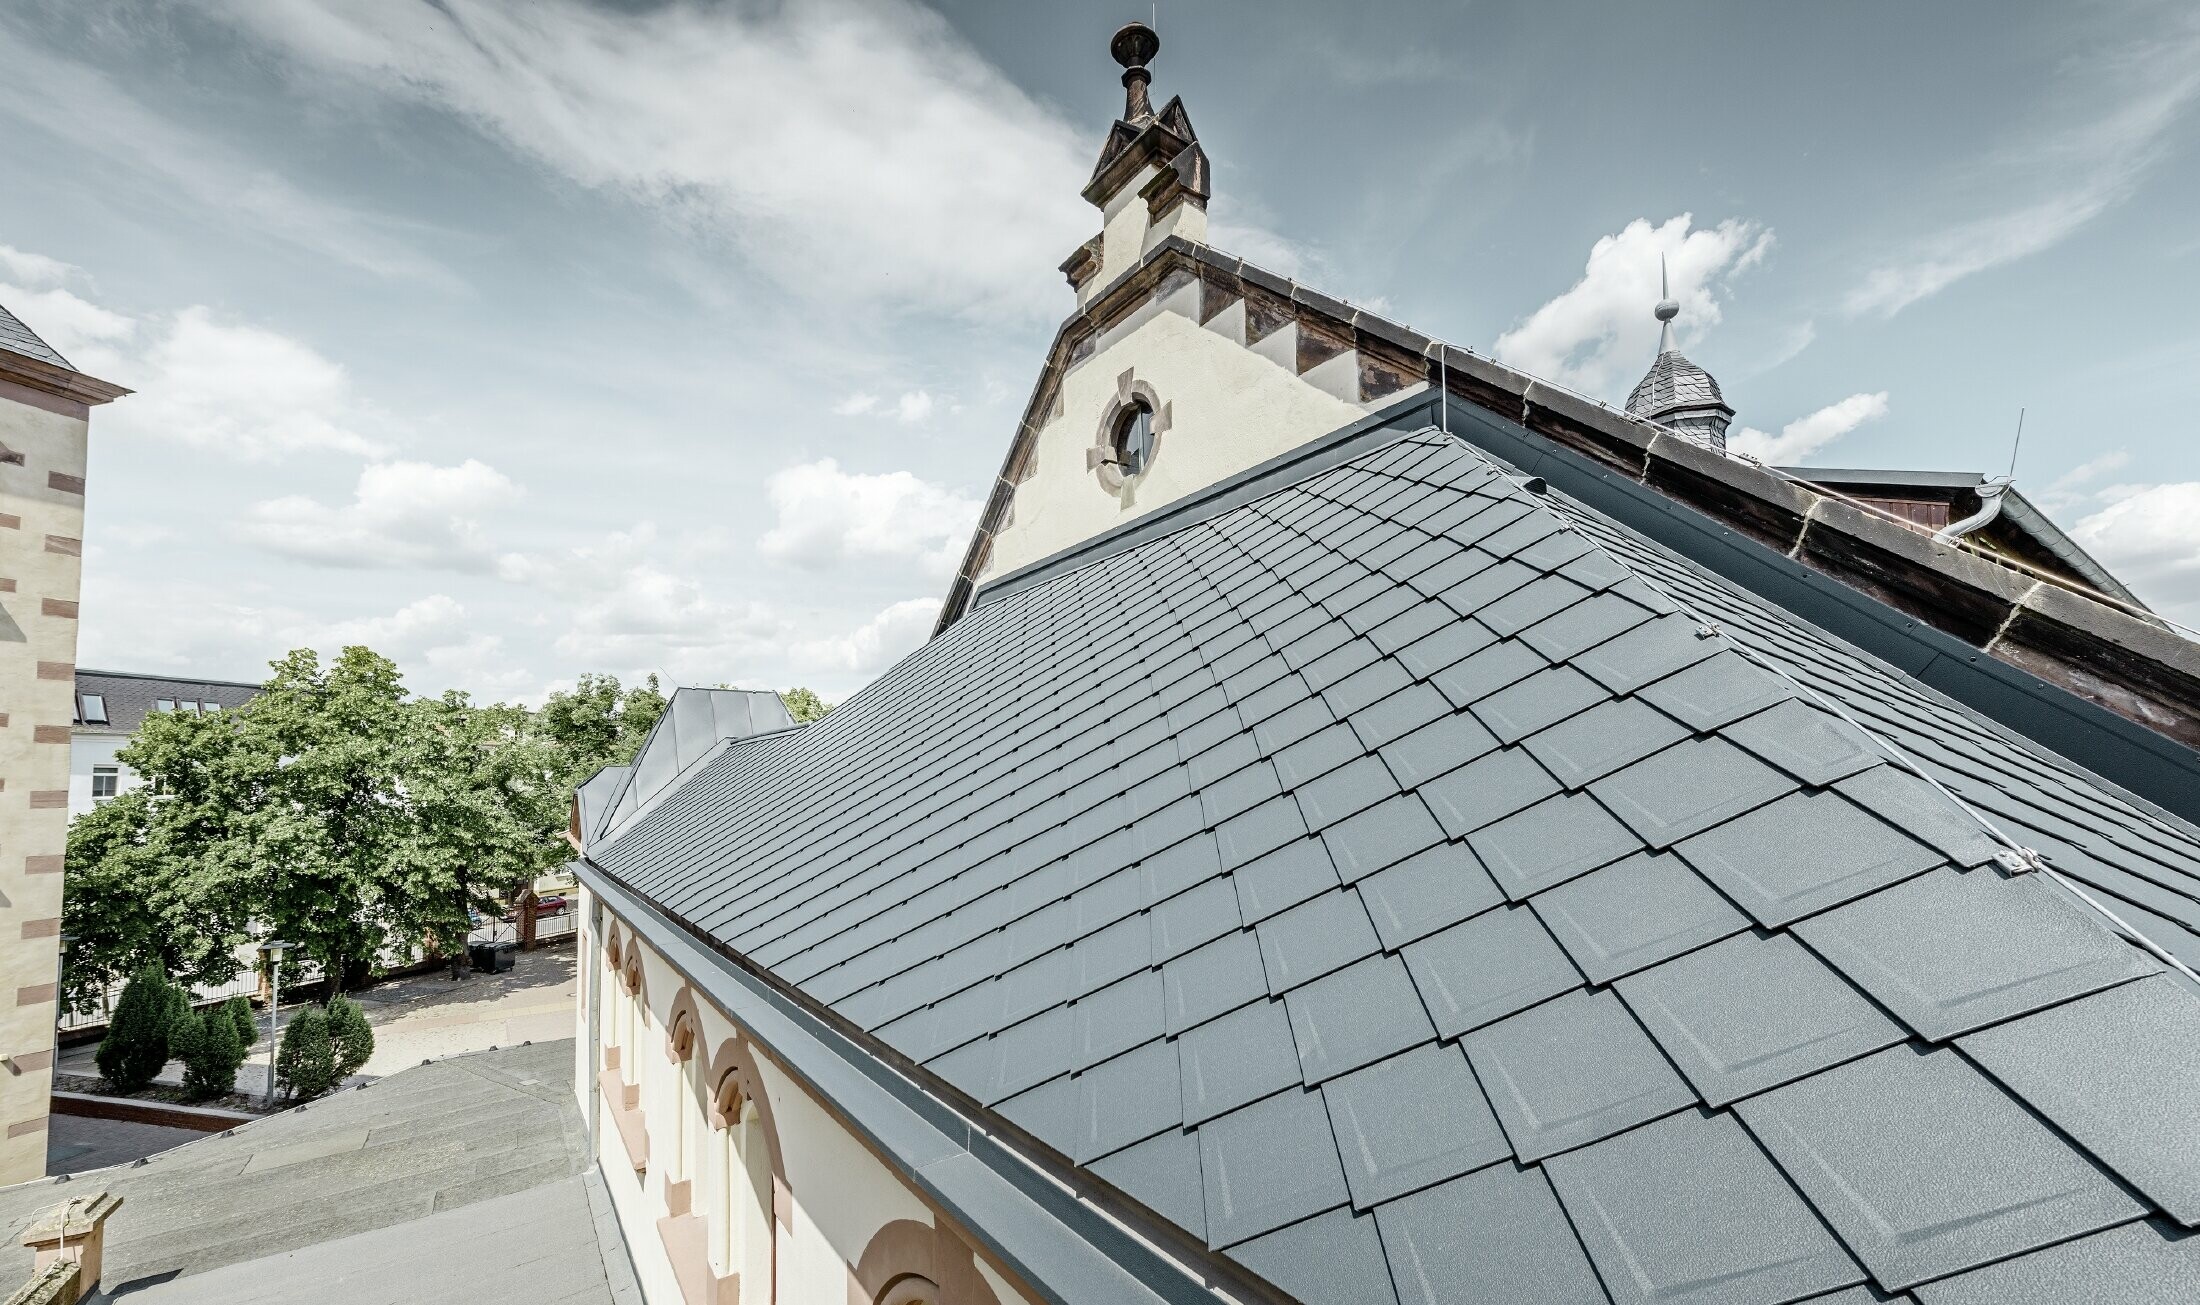 Newly renovated gym at Lutherstadt school in Wittenberg (Germany) with a PREFA aluminium roof, rhomboid roof tiles and Prefalz in anthracite